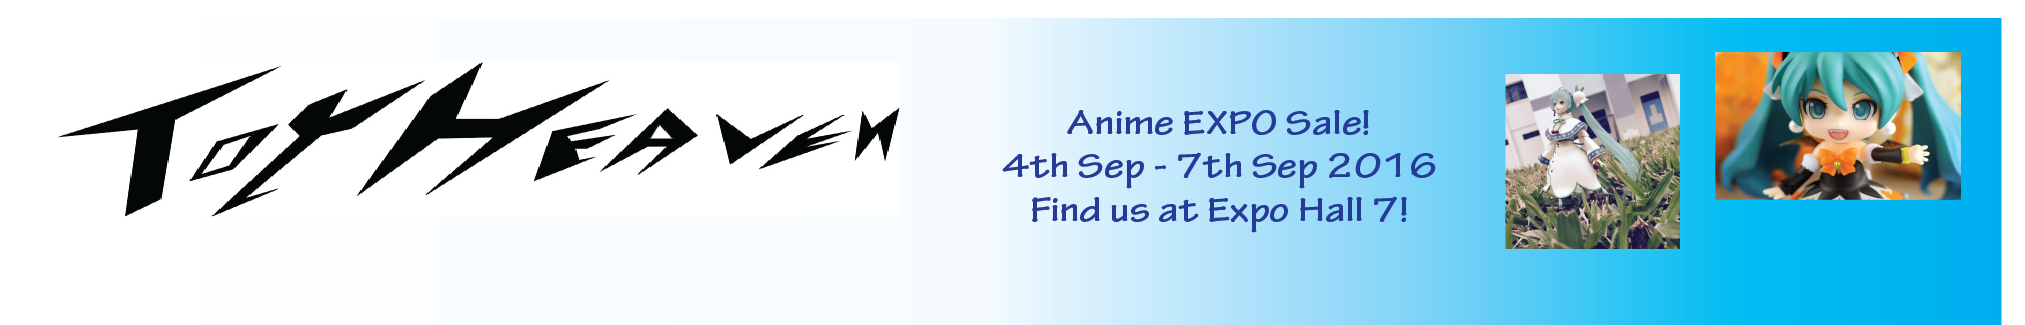 Anime Event Banner